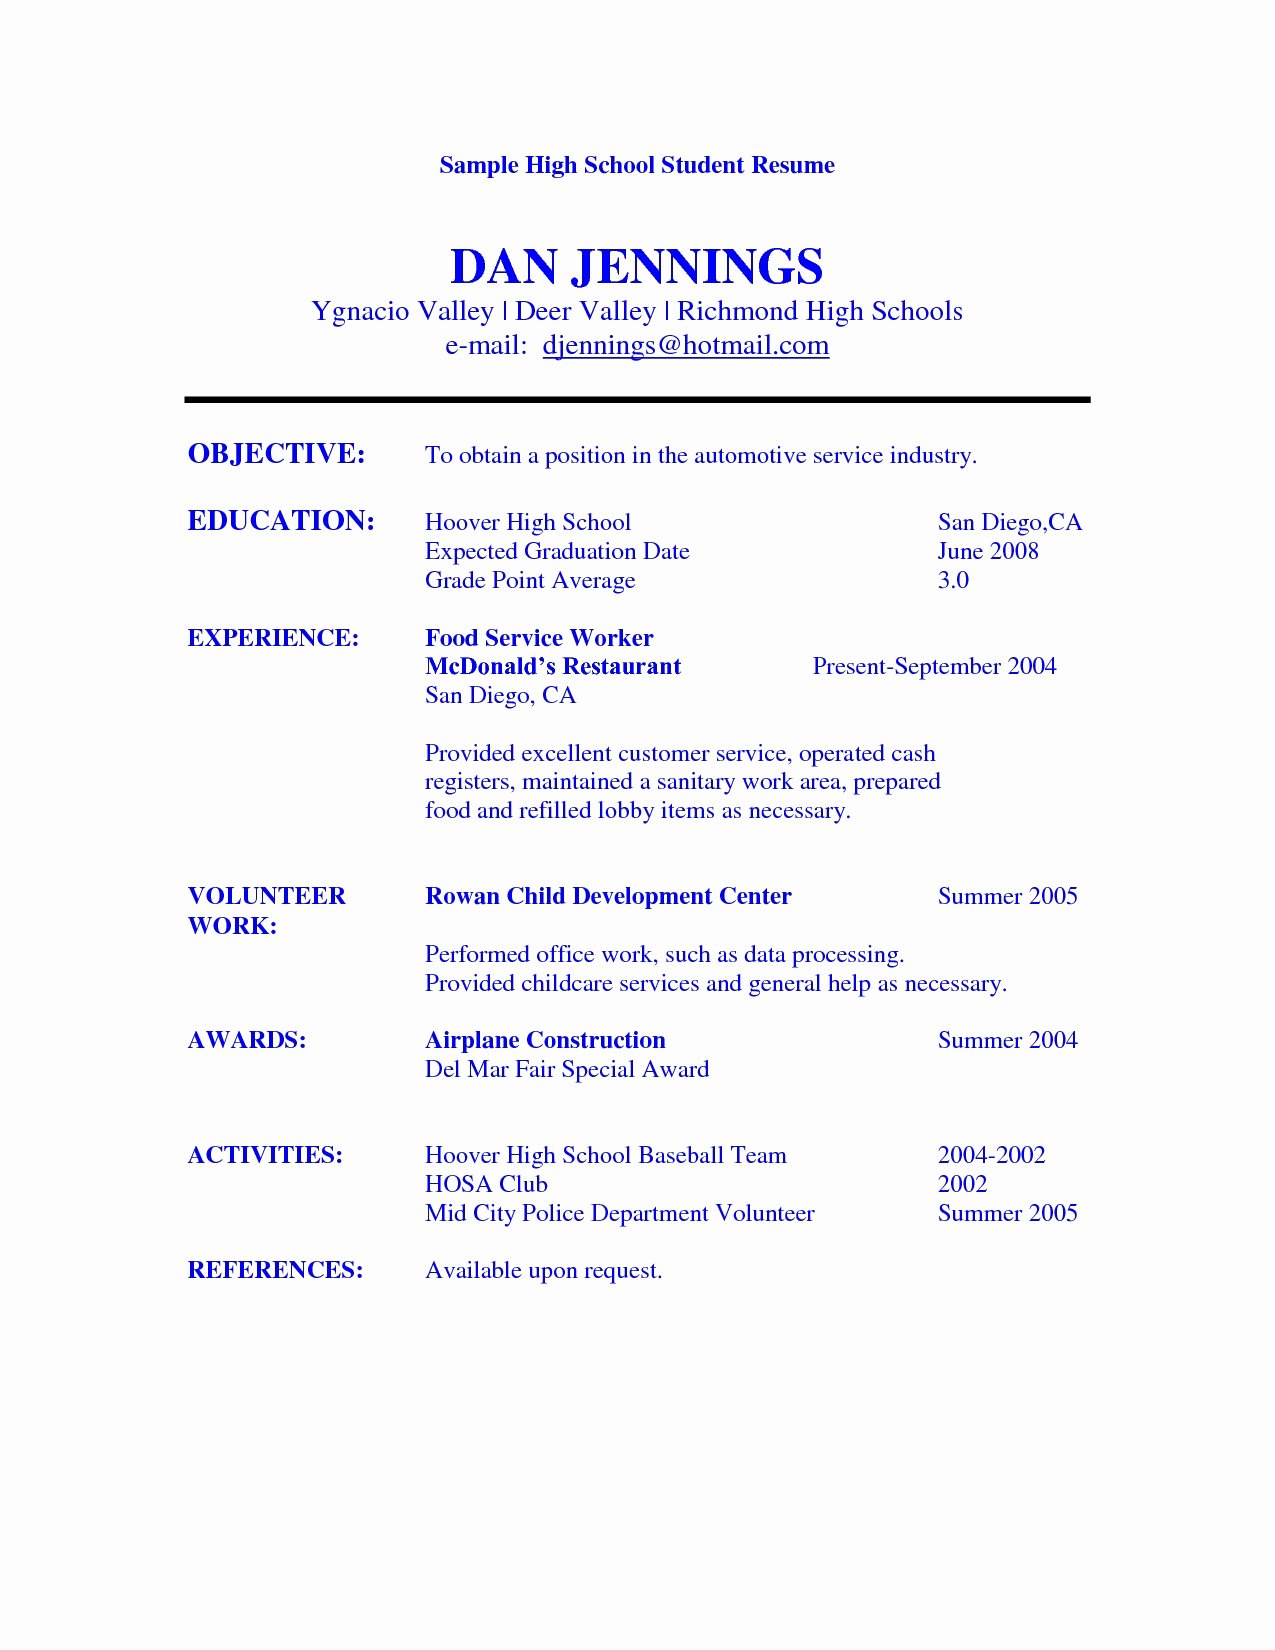 Resume Templates for Highschool Students High School